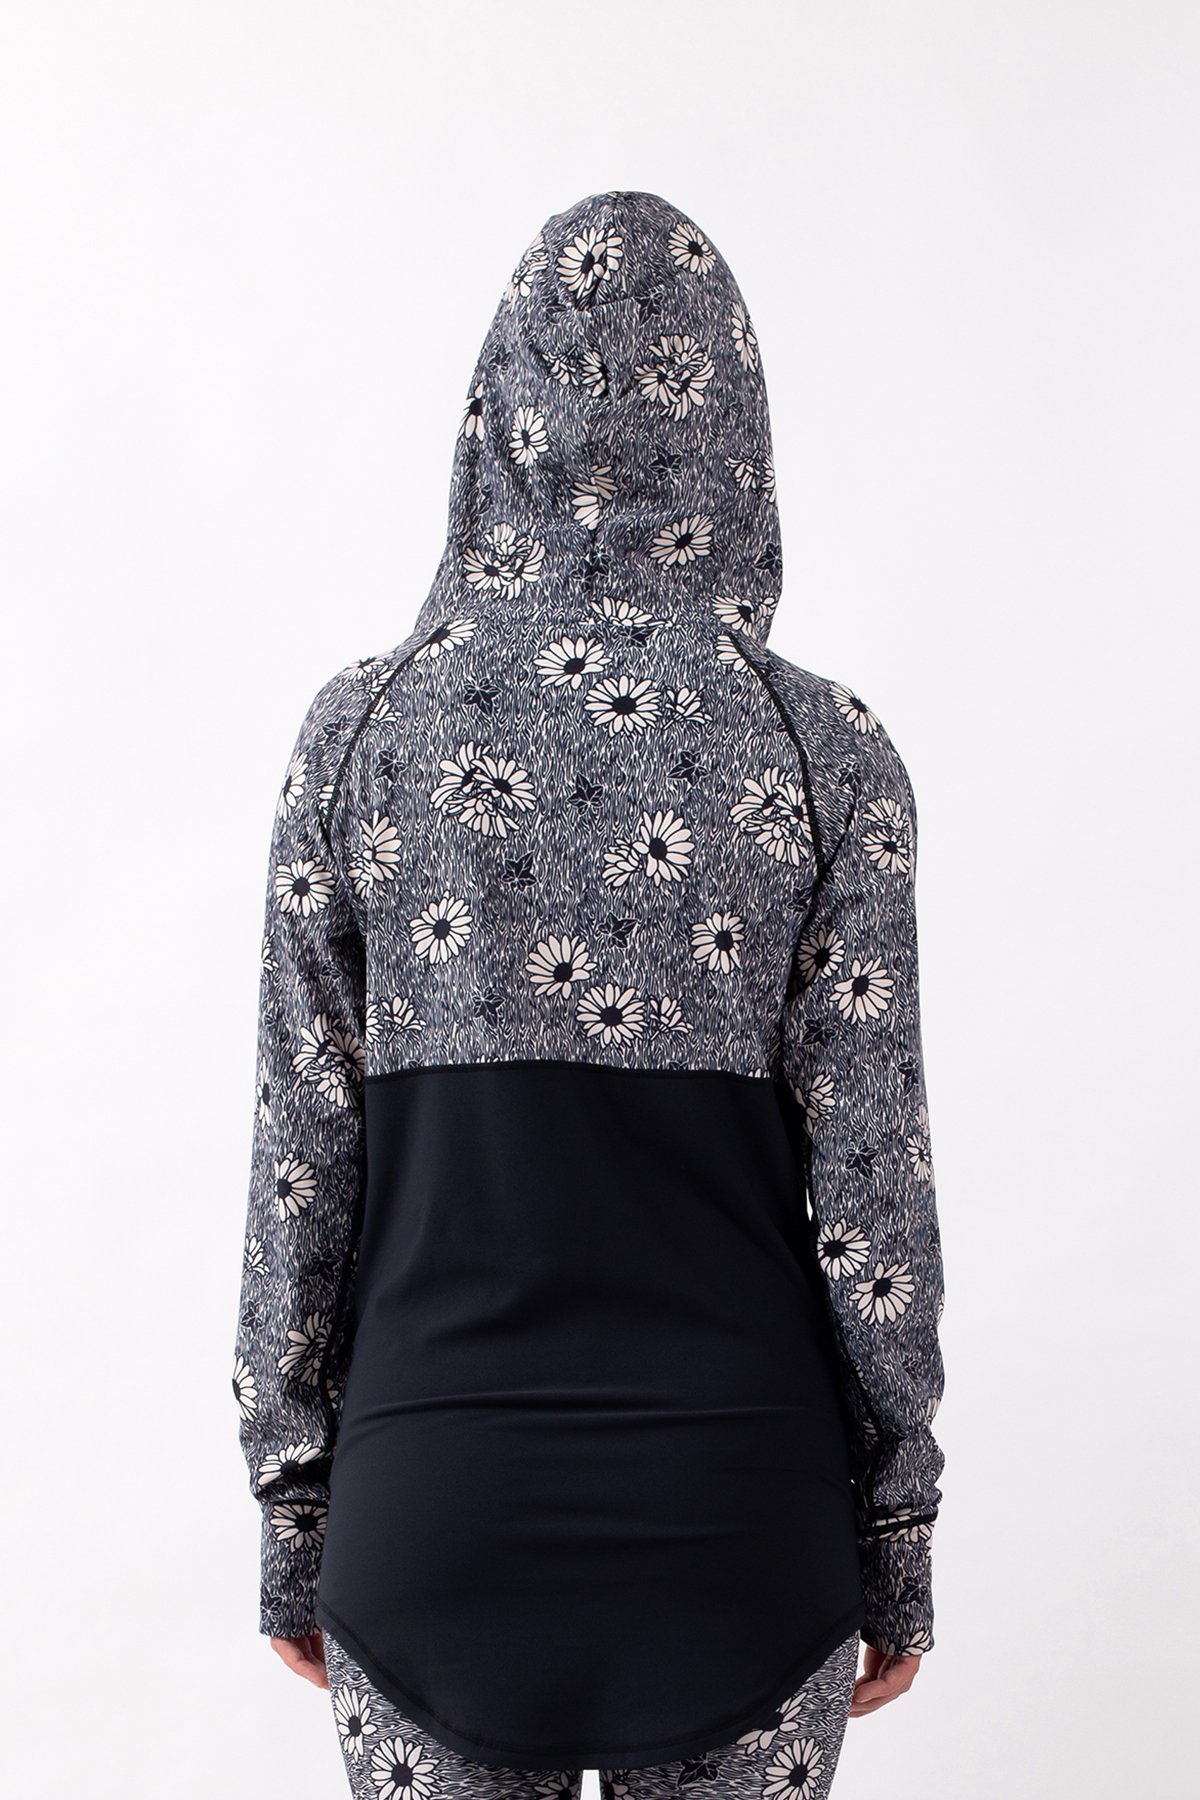 Base Layer | Icecold Hoodie Top - Ivy Blossom | XS